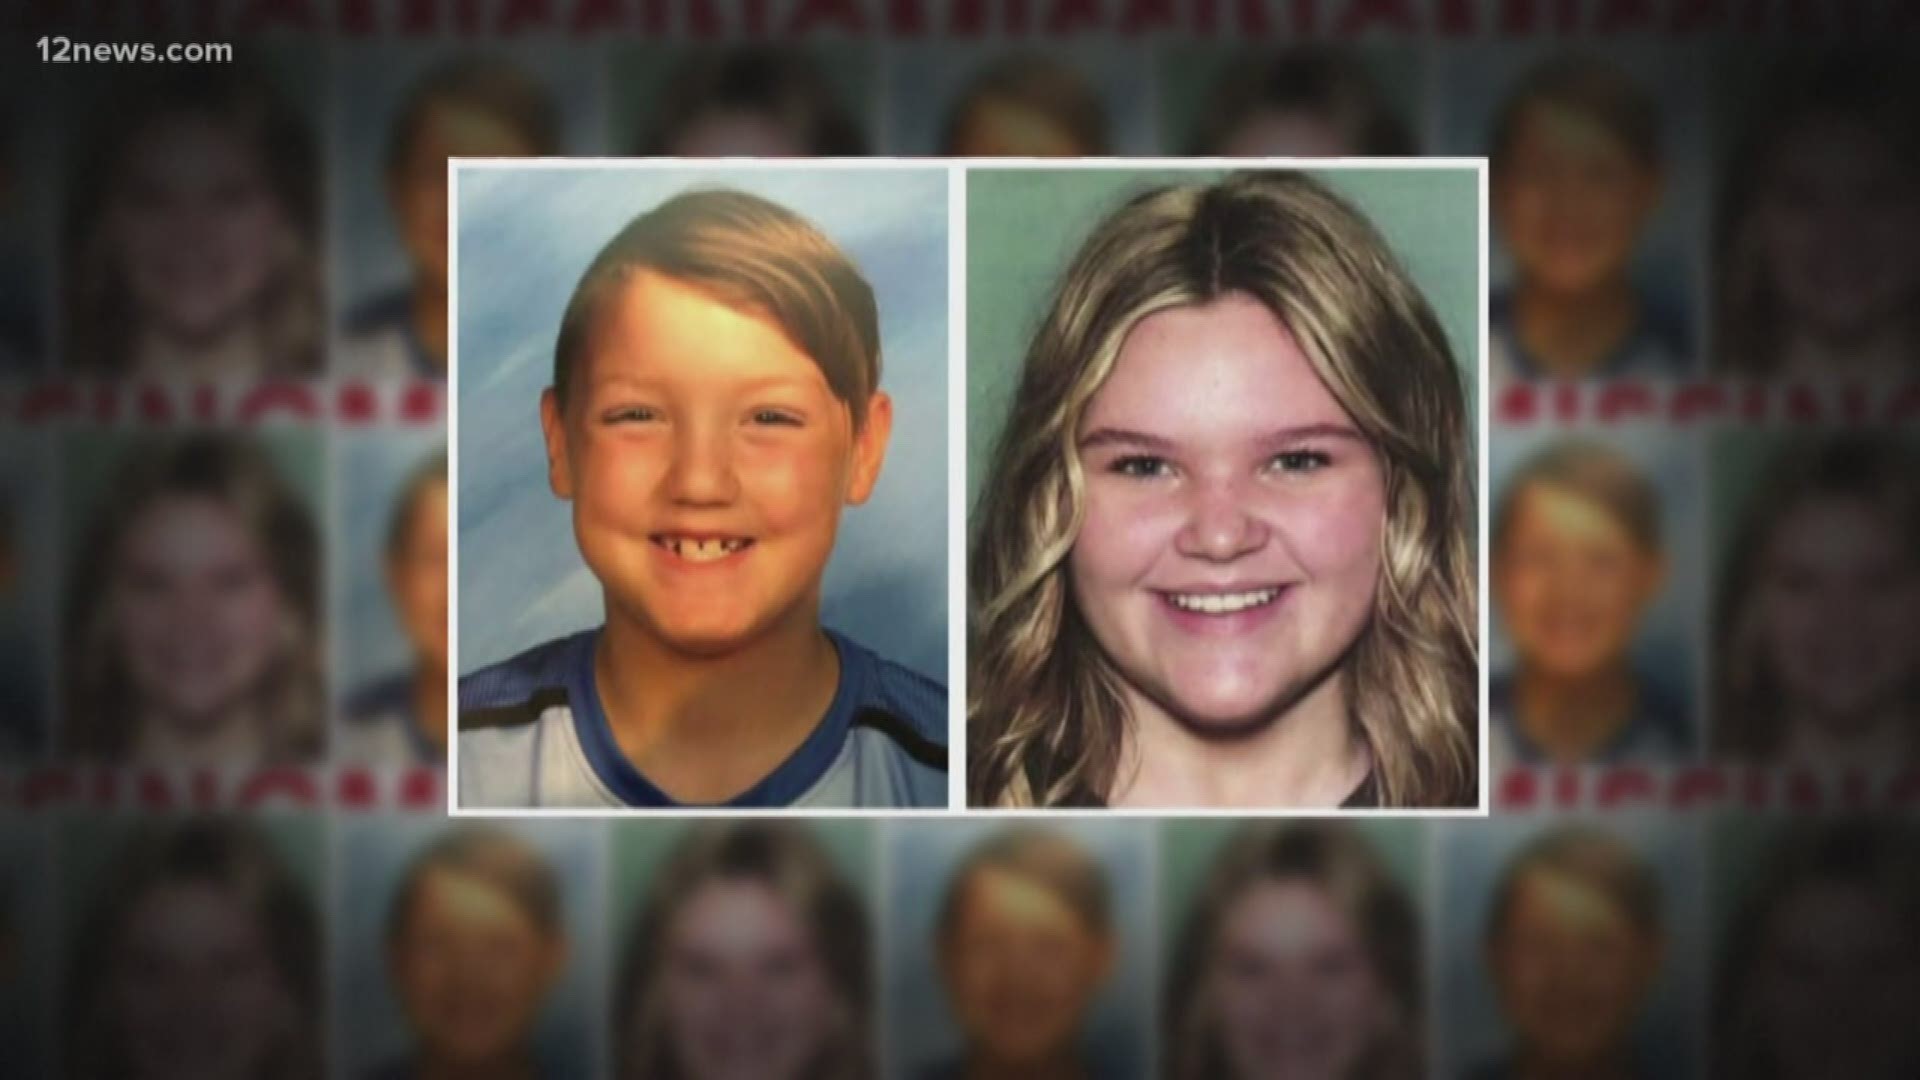 The grandfather of one of two missing children in Idaho pleads for information on them. The kids moved to Idaho from Chandler, Arizona, last year.